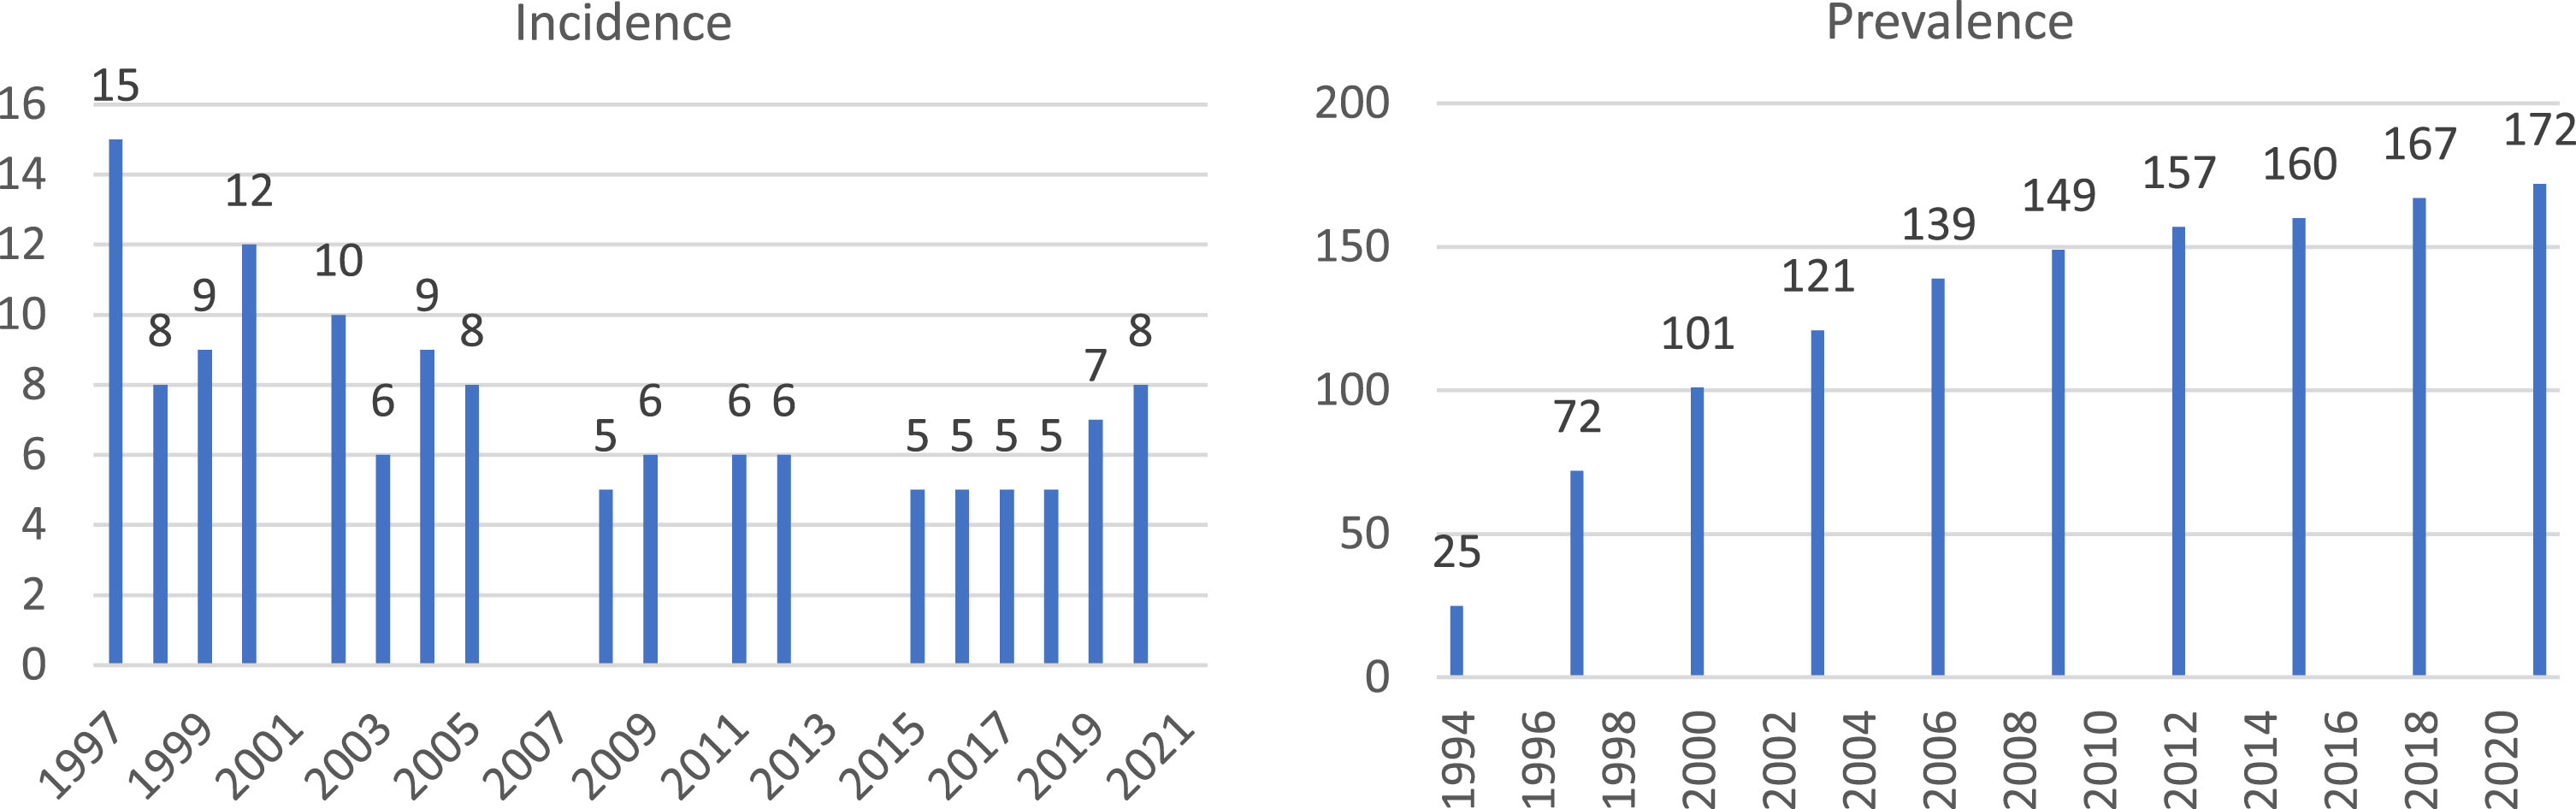 Incidence and prevalence of DMD, number of individuals with DMD per year. Note: Incidence in years 2001, 2006, 2007, 2010, 2013 and 2014 is not provided due to the incidence being lower than five. Prevalence is provided every third year due to data privacy regulations. Incidence in the first few years is likely overestimated due to prevalent individuals from before 1997 being observed with relevant ICD-10 code for the first time in the registers.